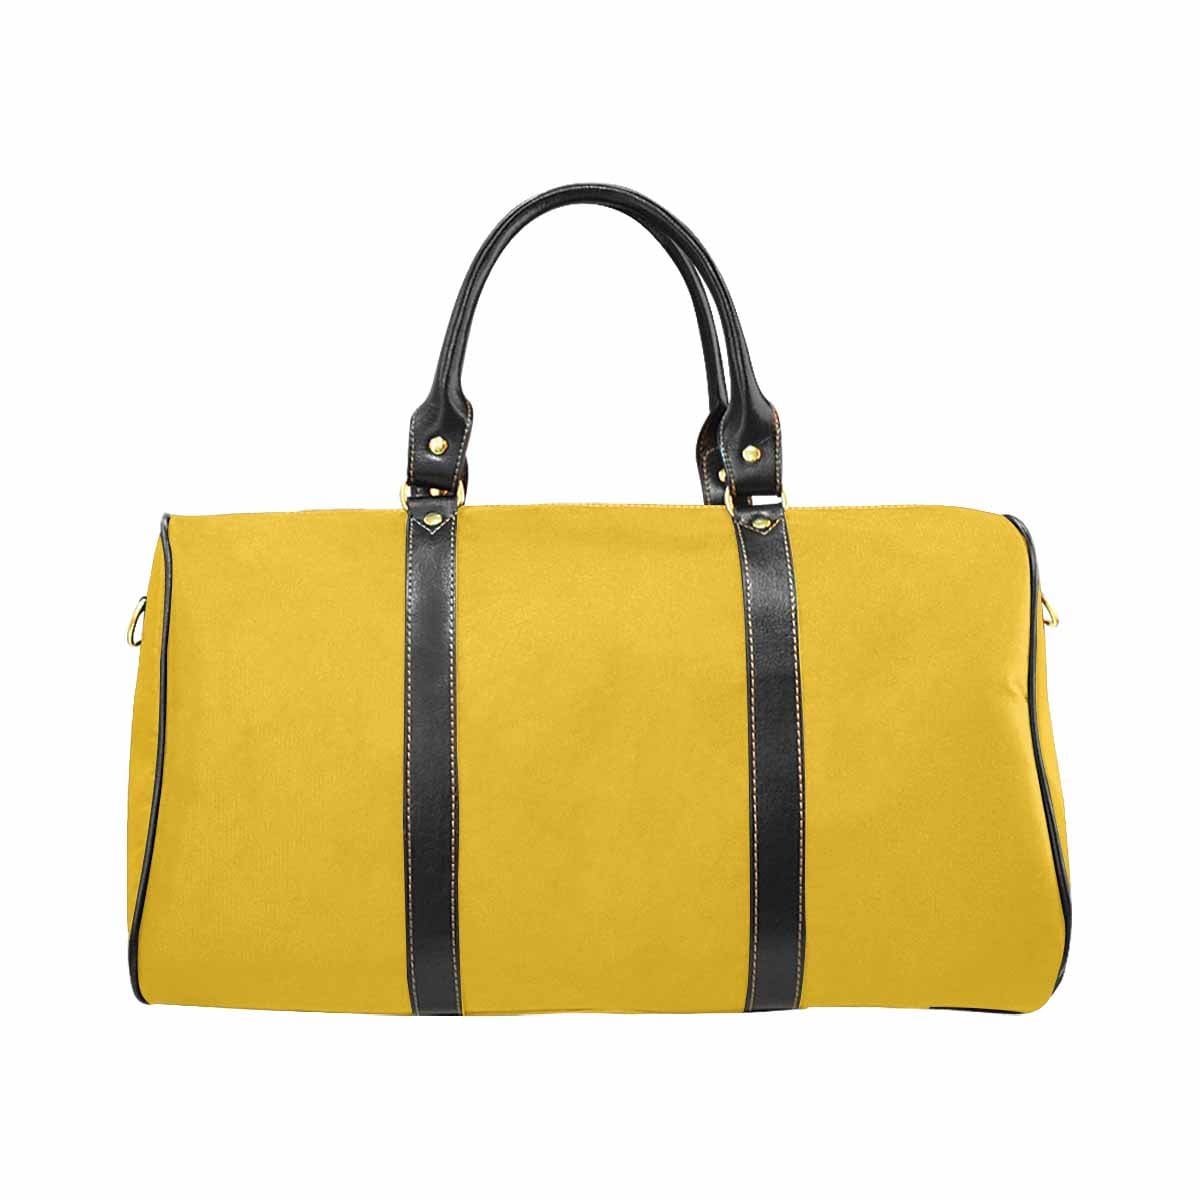 Travel Bag, Leather Carry On Large Luggage Bag, Freesia Yellow